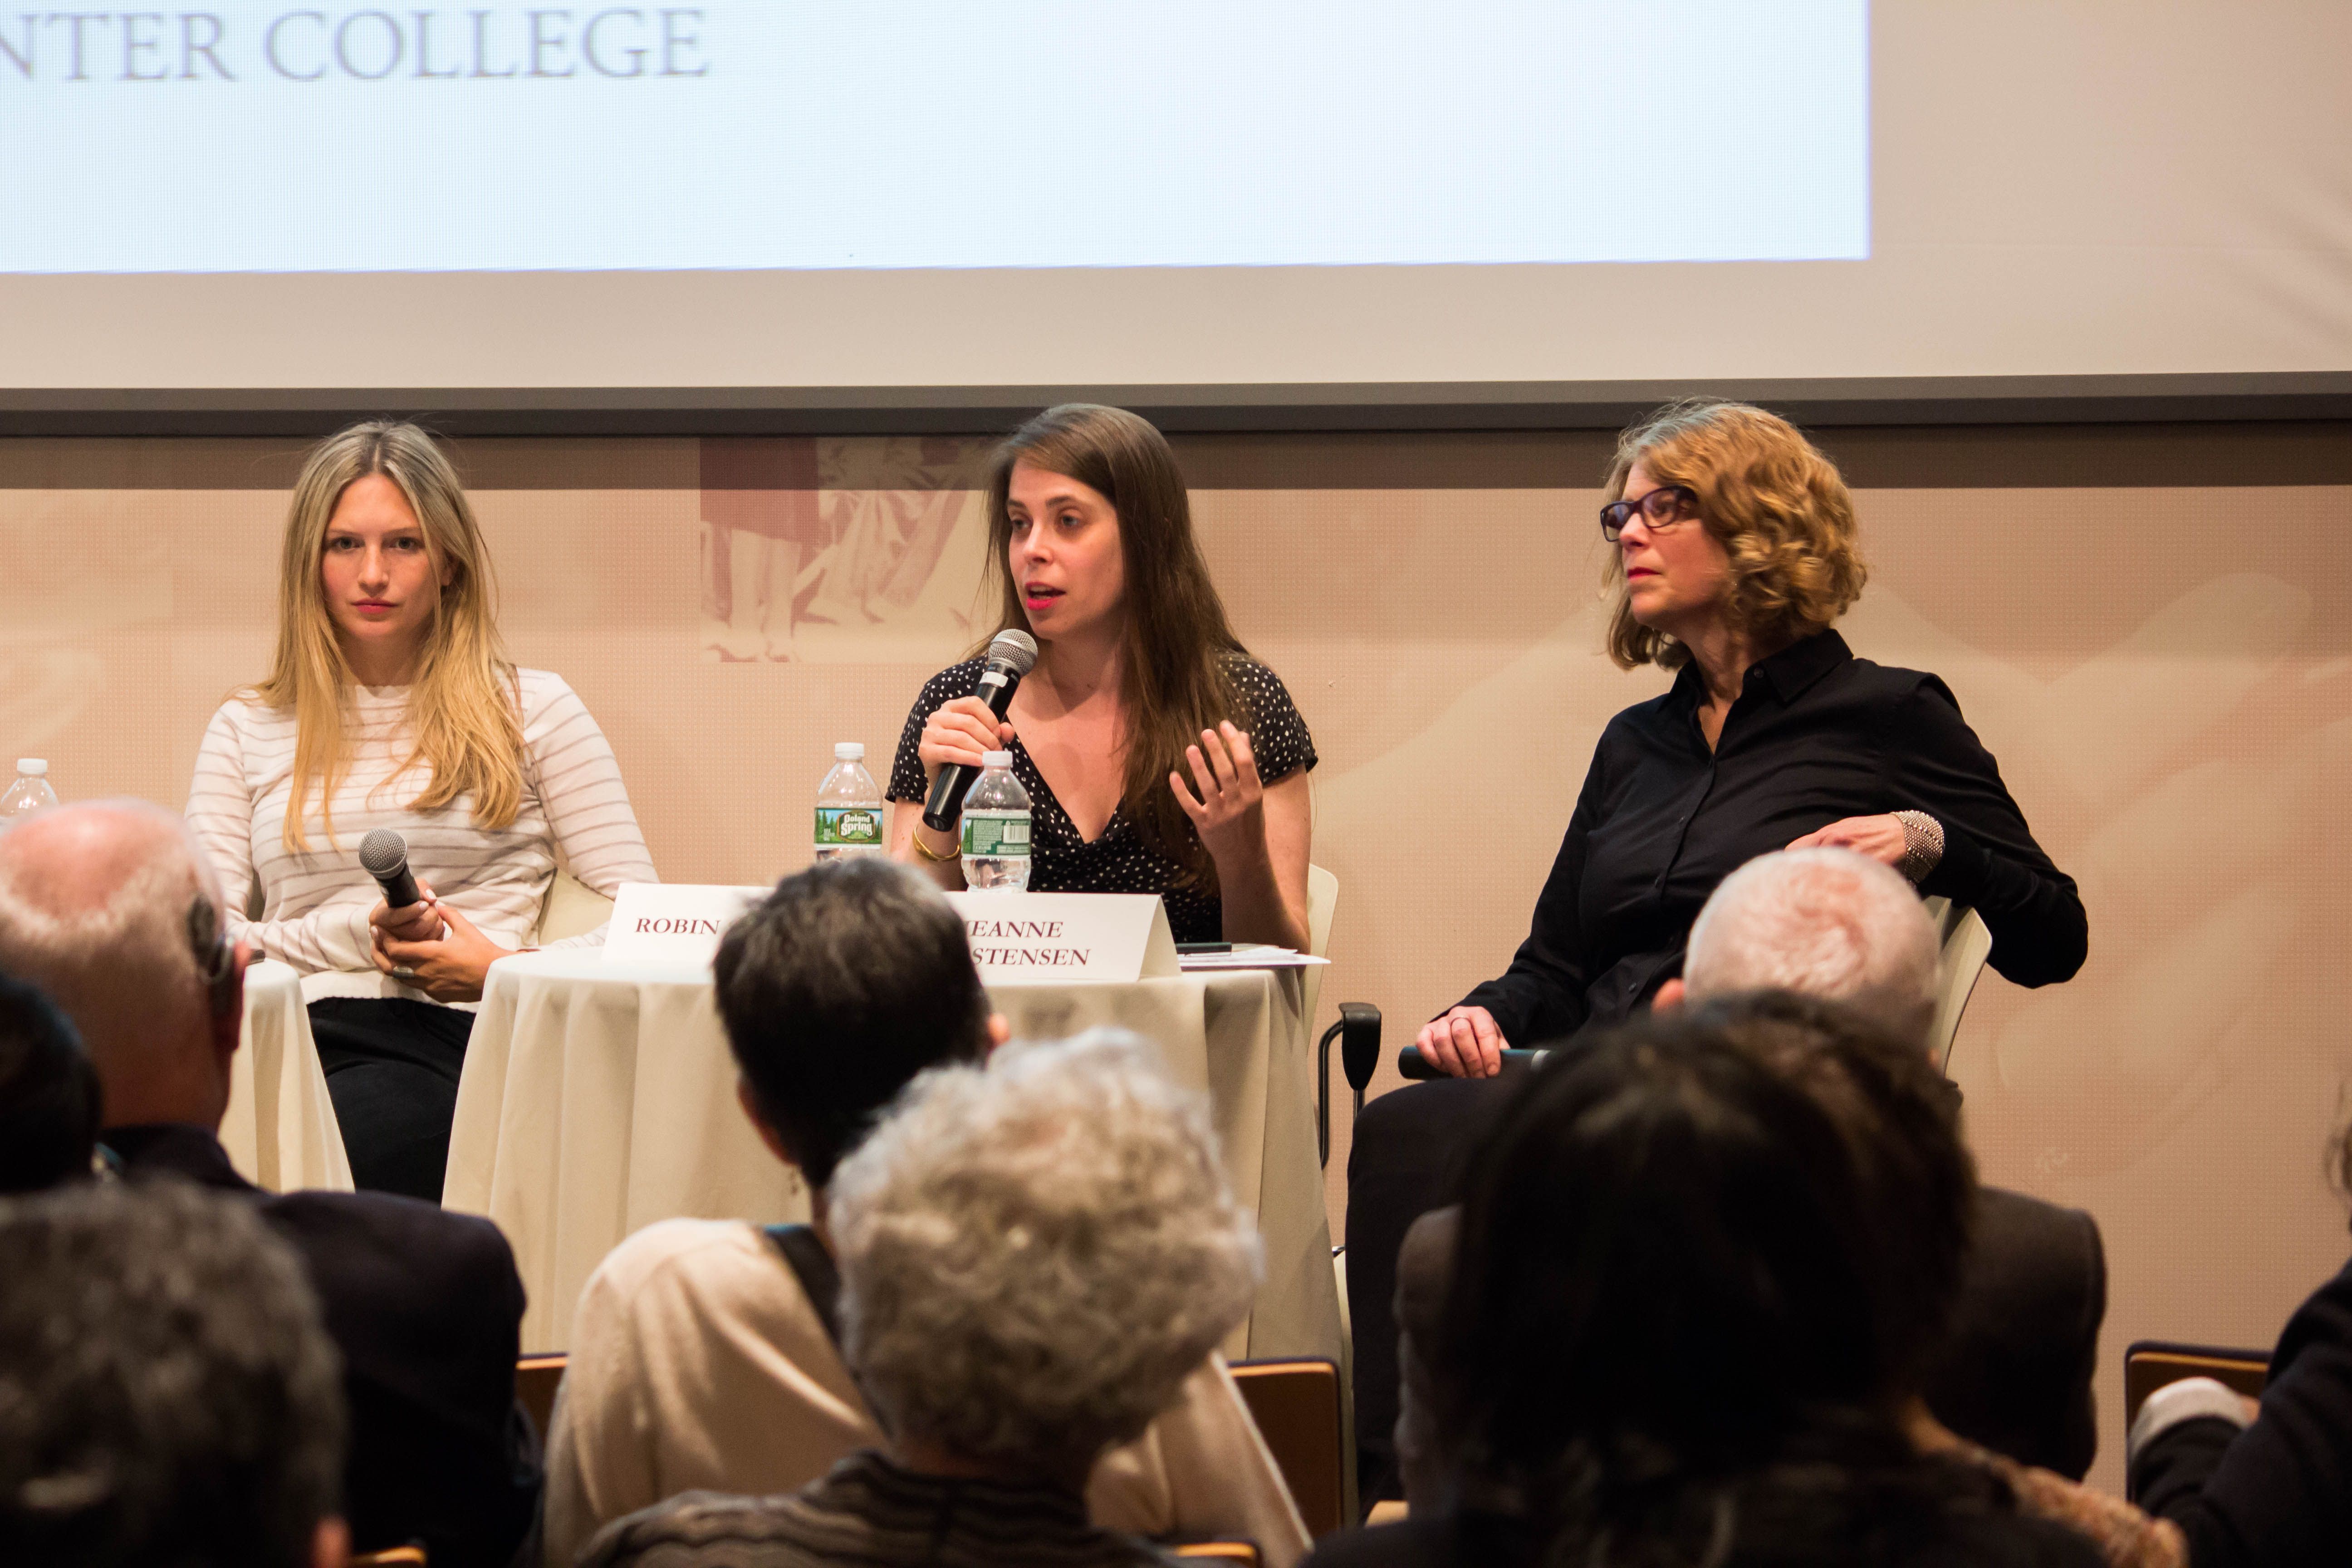 At Roosevelt House Public Policy Institute at Hunter College in New York, Pulitzer Center grantee journalists (left to right) Emily Kassie, Robin Shulman, and Jeanne Carstensen explore the current state of the refugee crisis following individual presentations. Image by Lauren Shepherd. United States, 2017. 